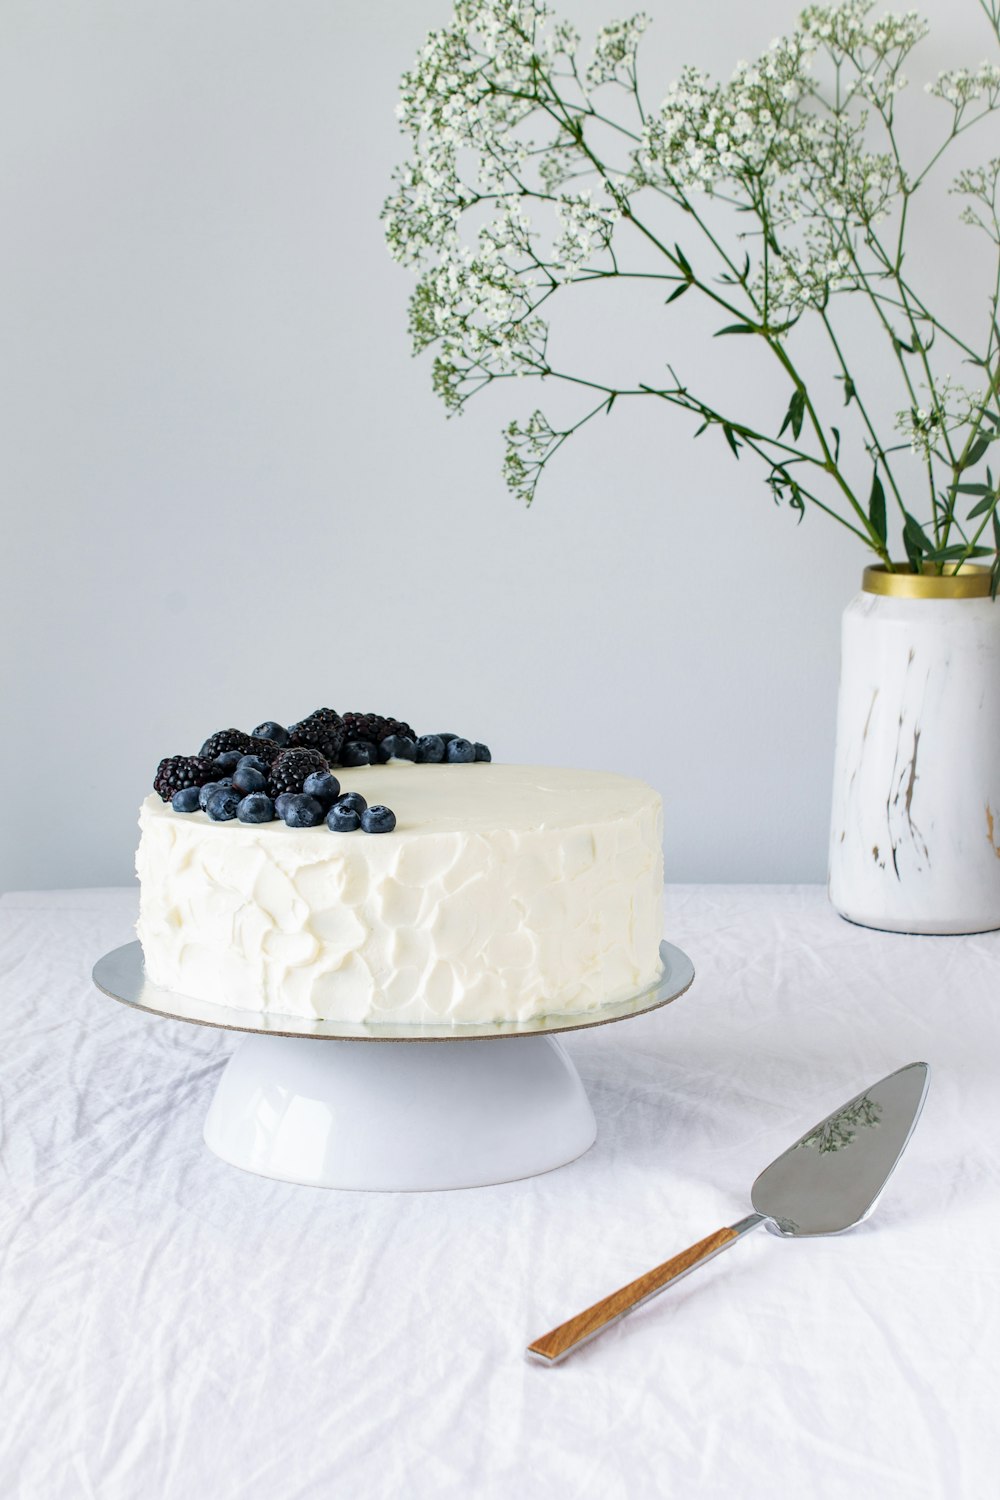 White Cake Pictures | Download Free Images on Unsplash